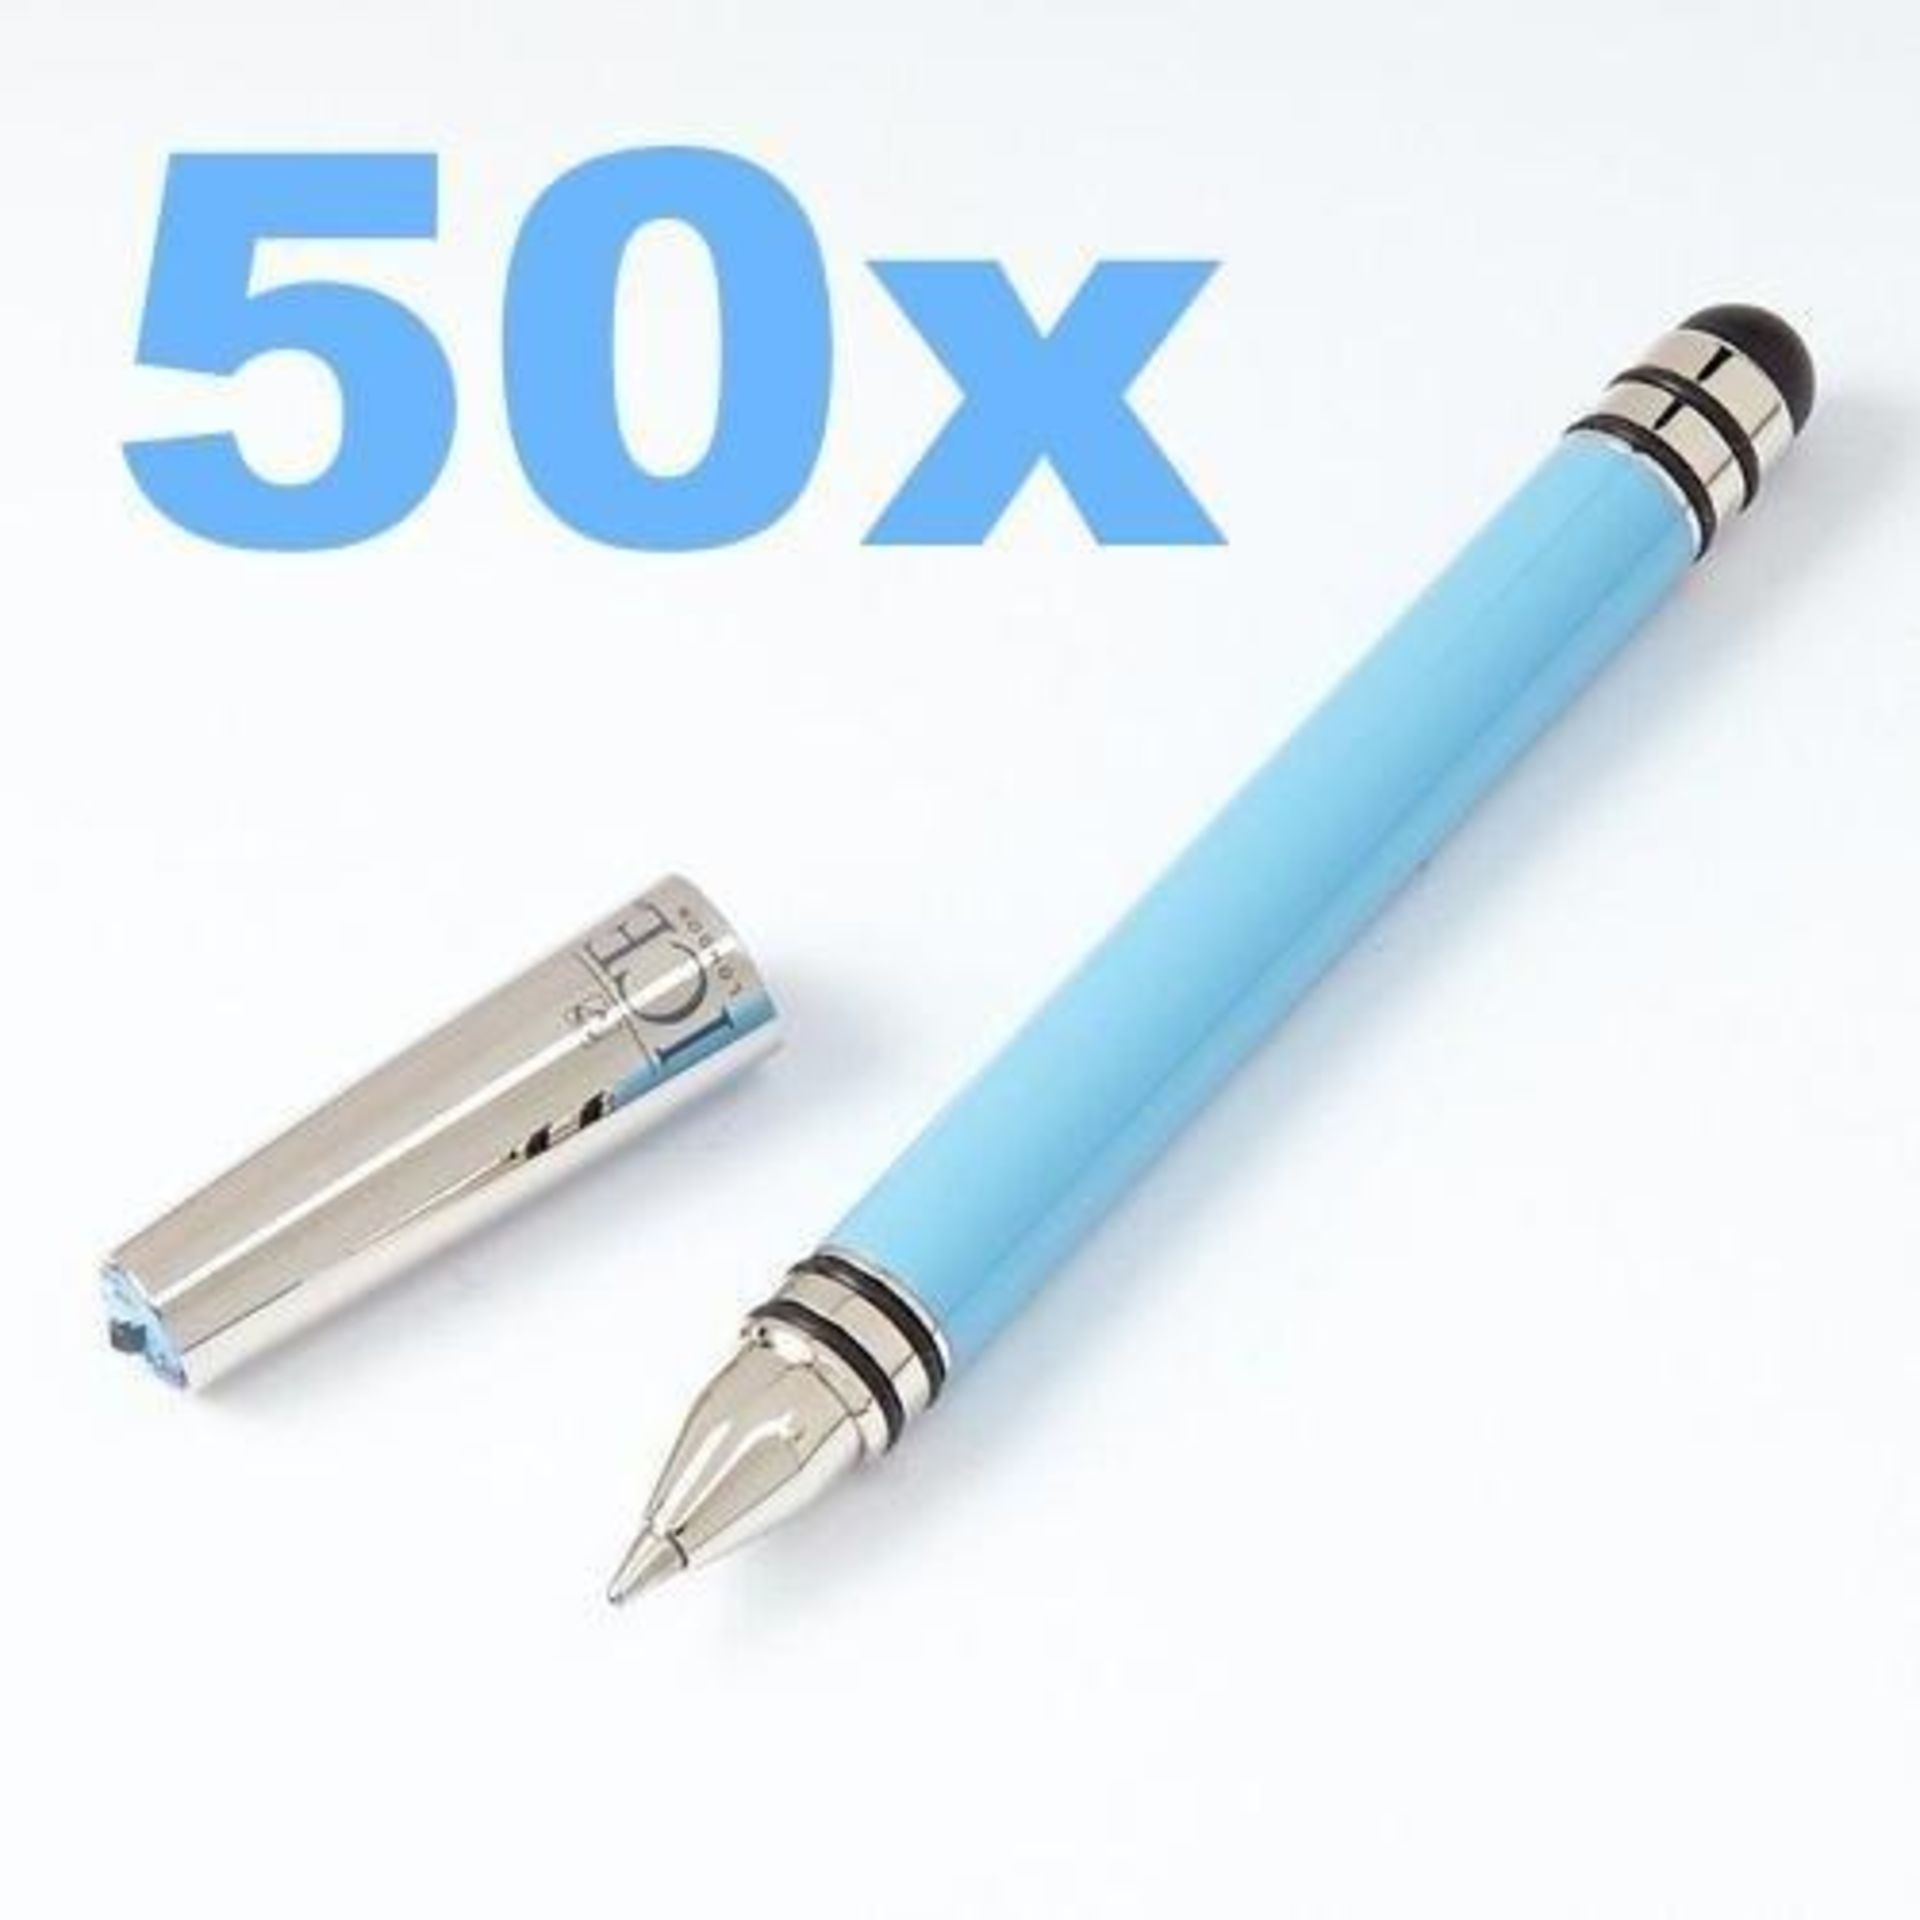 50 x ICE LONDON App Pen Duo - Touch Stylus And Ink Pen Combined - Colour: LIGHT BLUE - MADE WITH